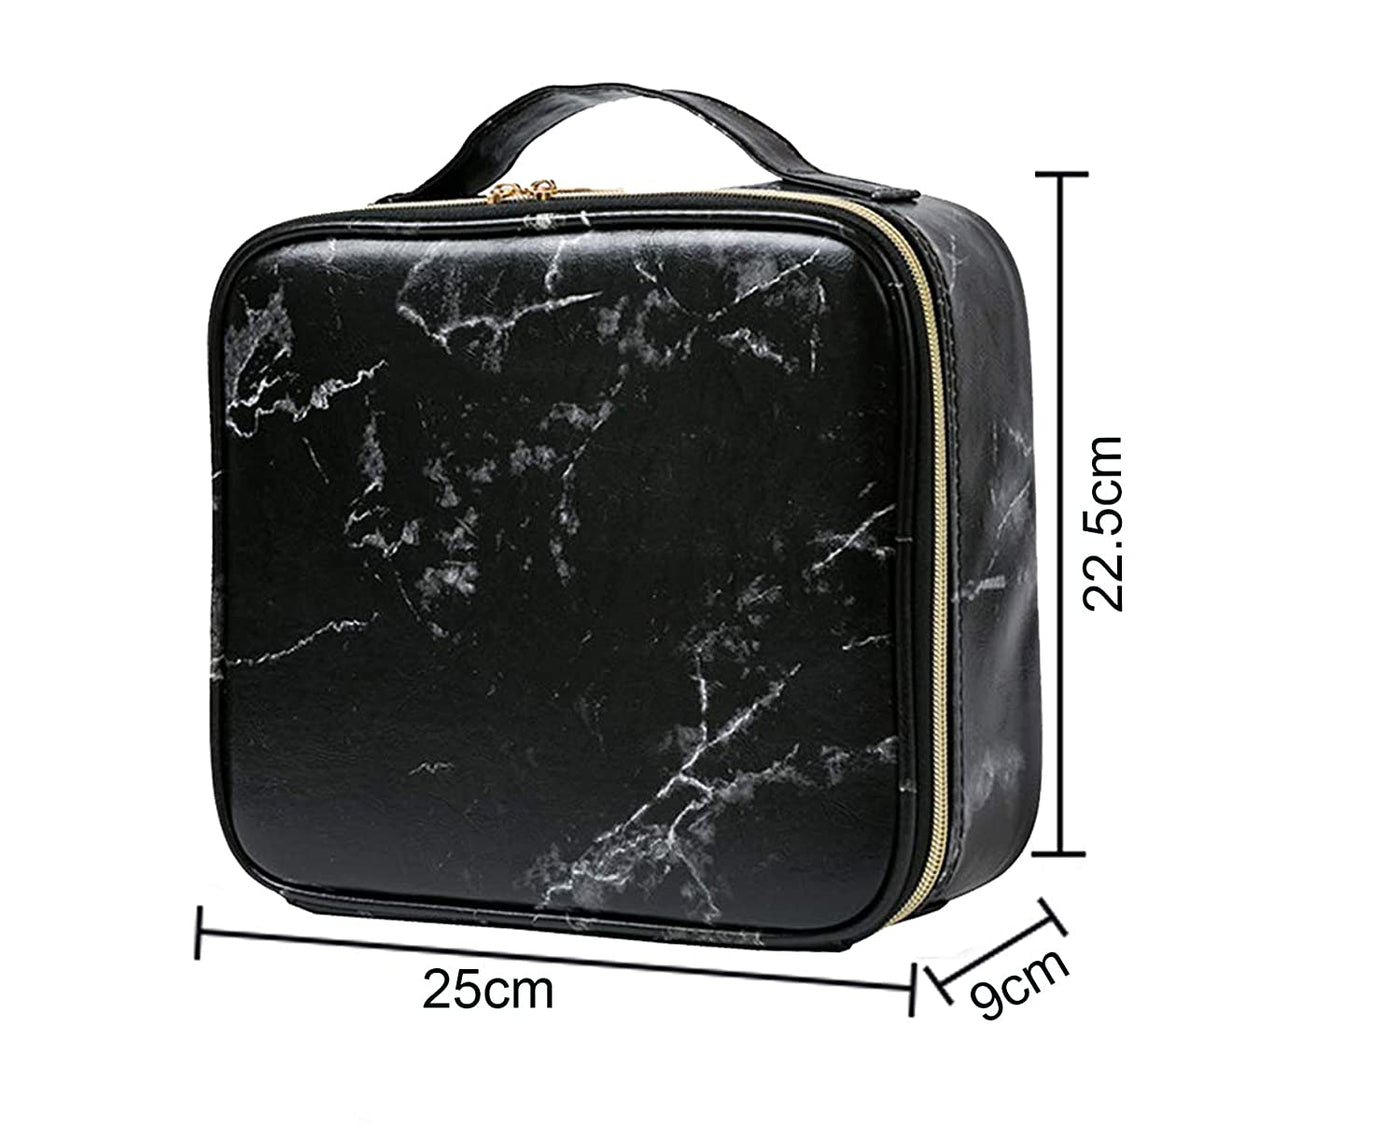 Makeup Cosmetic Storage Case with Adjustable Compartment (Black Marble)